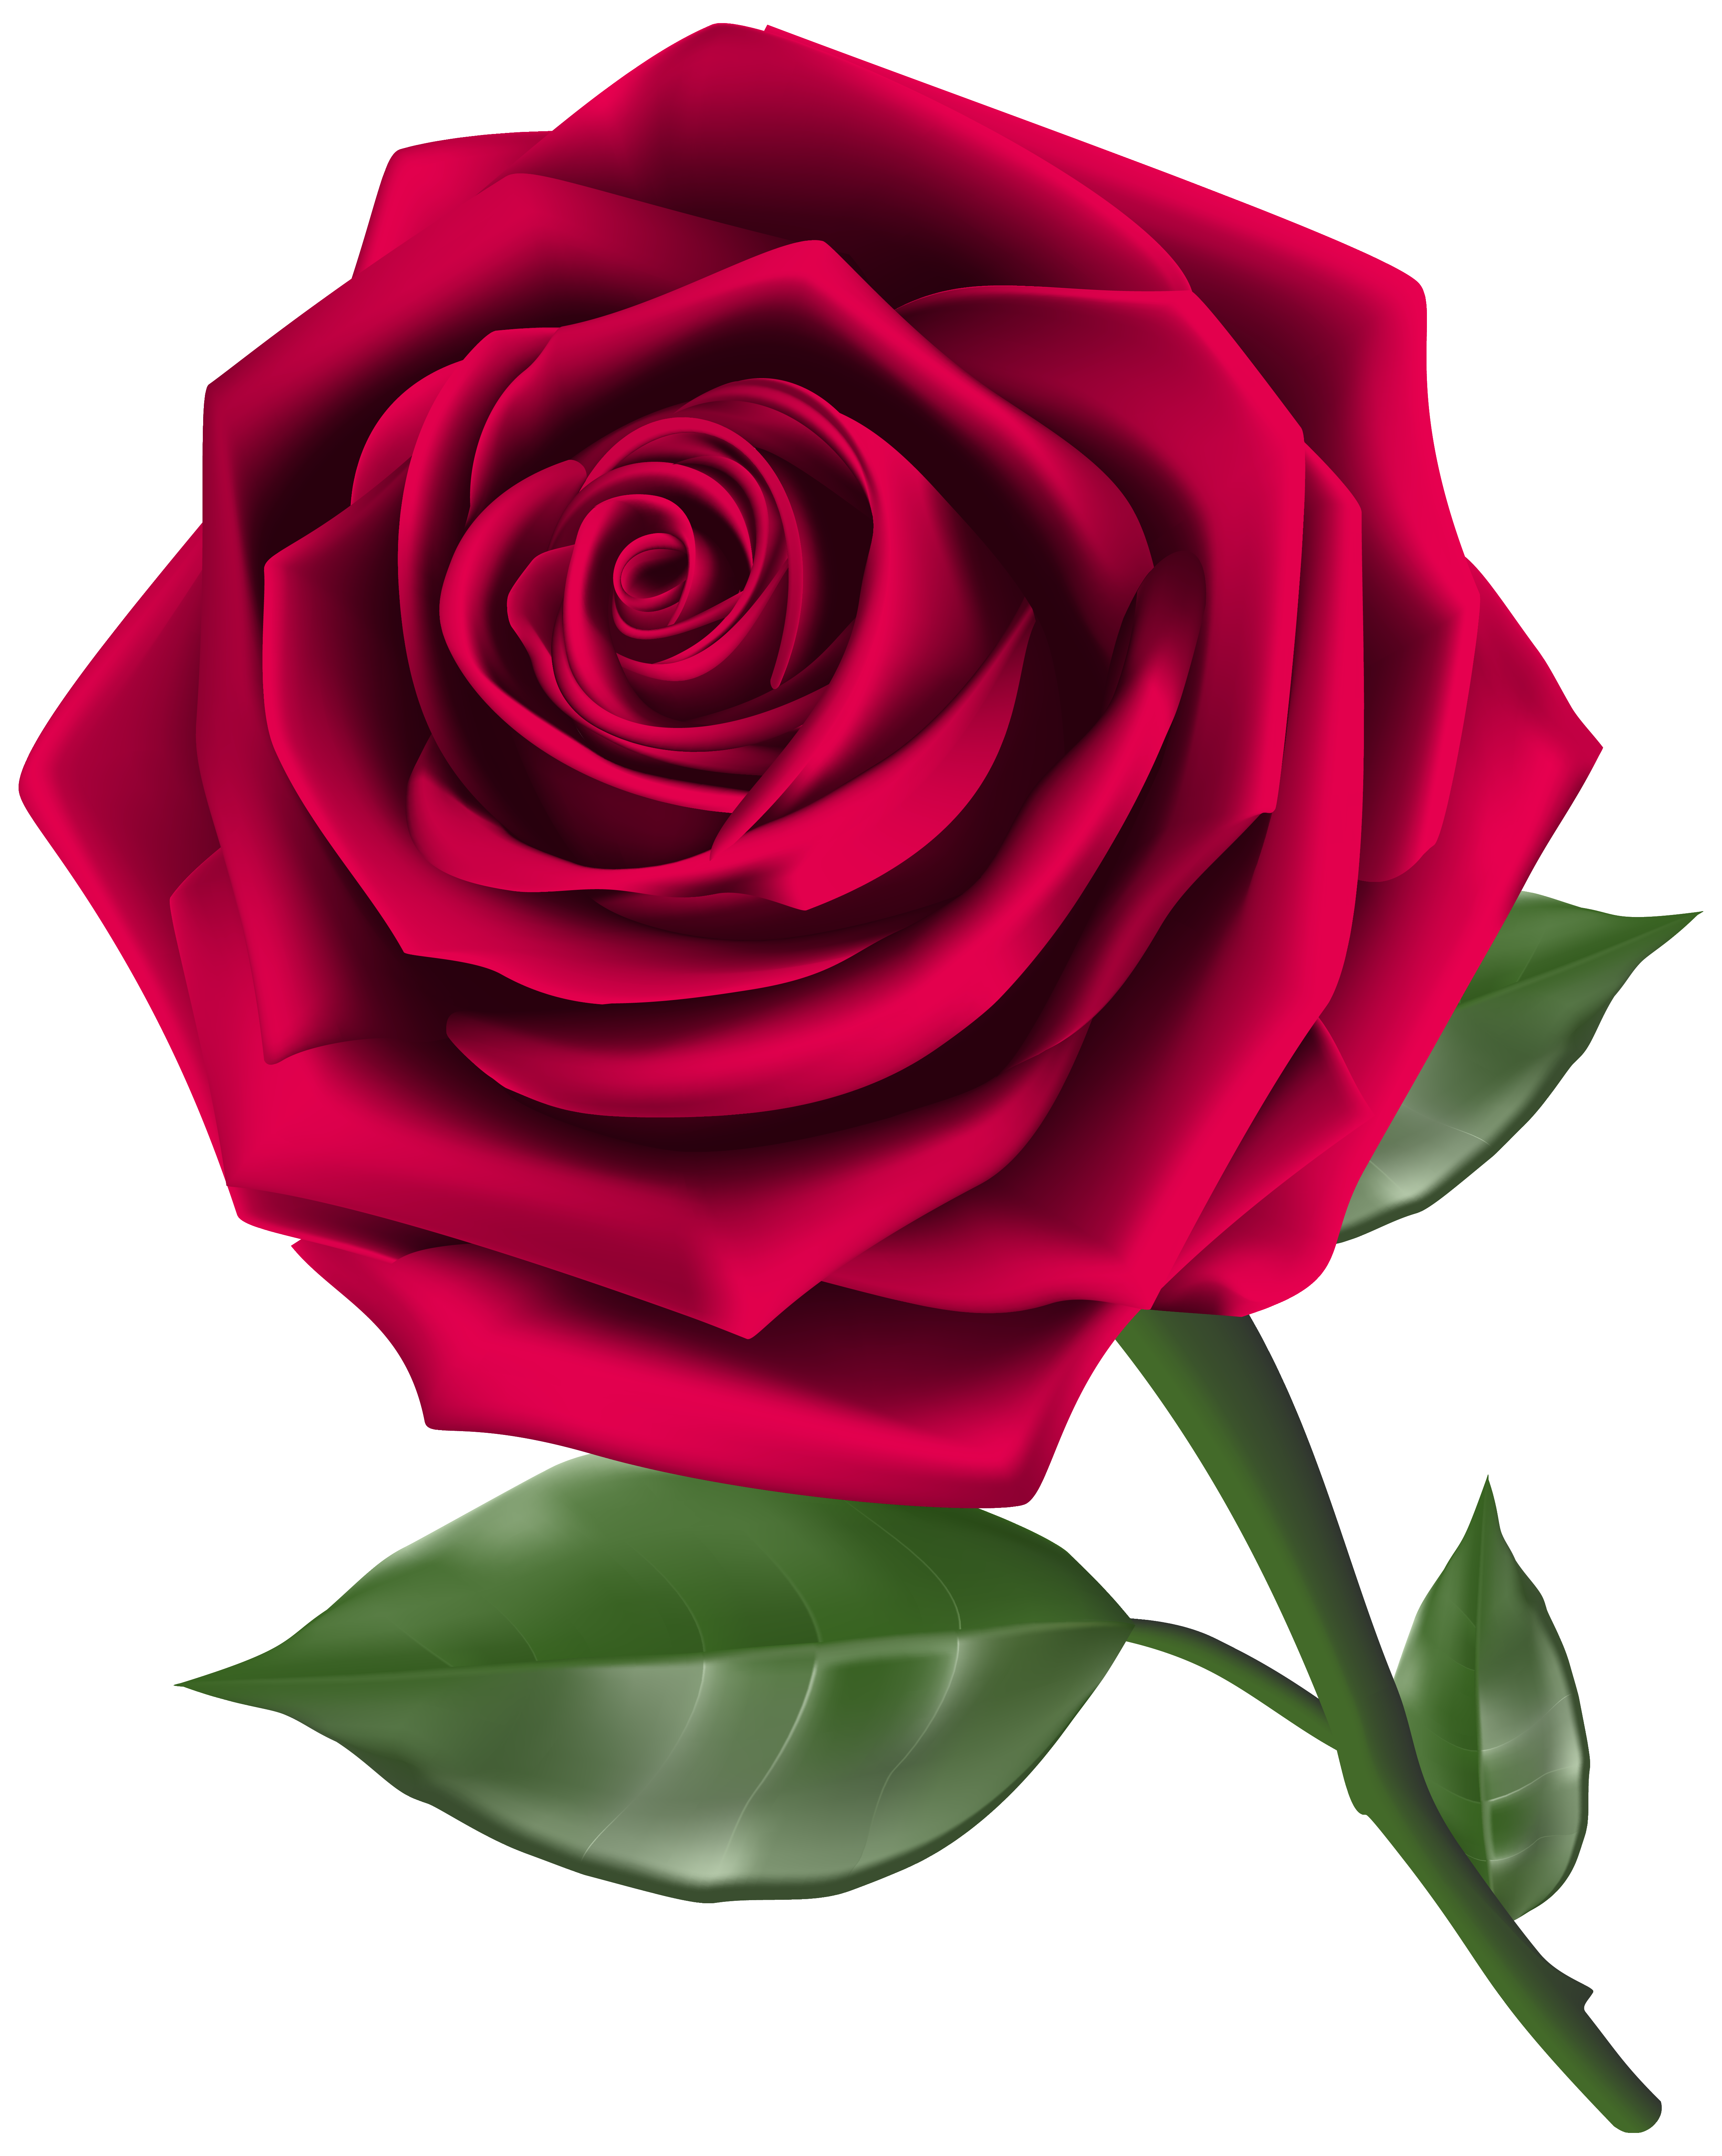 Clipart rose. Steam png image gallery